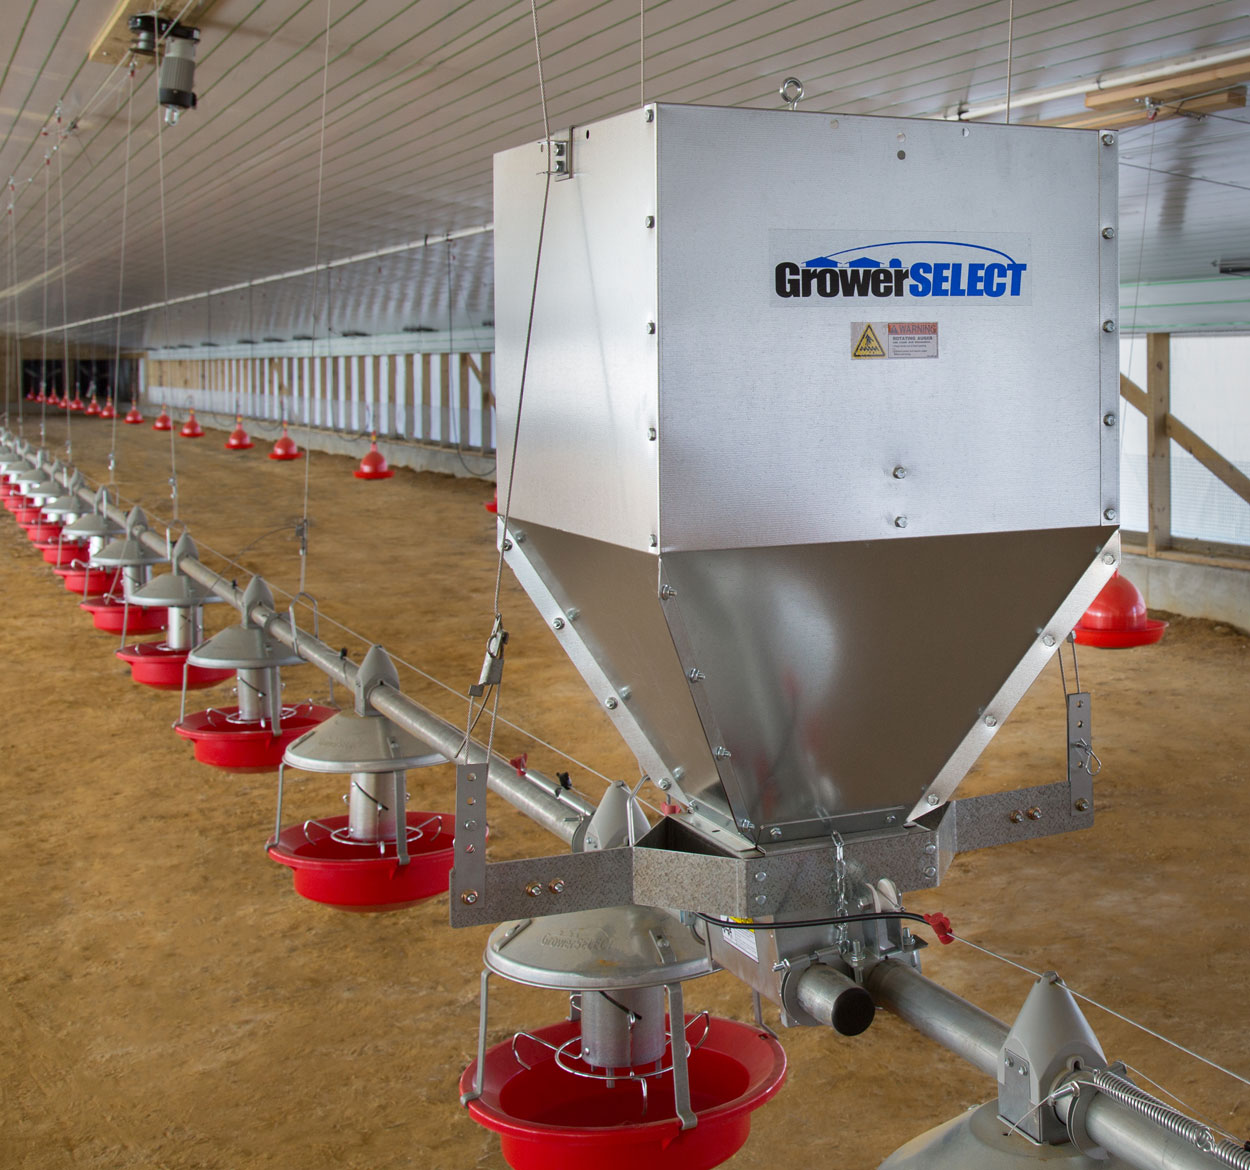 GrowerSELECT® Adult Turkey Feeders and GrowerSELECT poultry feed system components are designed and manufactured to provide reliable performance and conversion potential flock after flock.